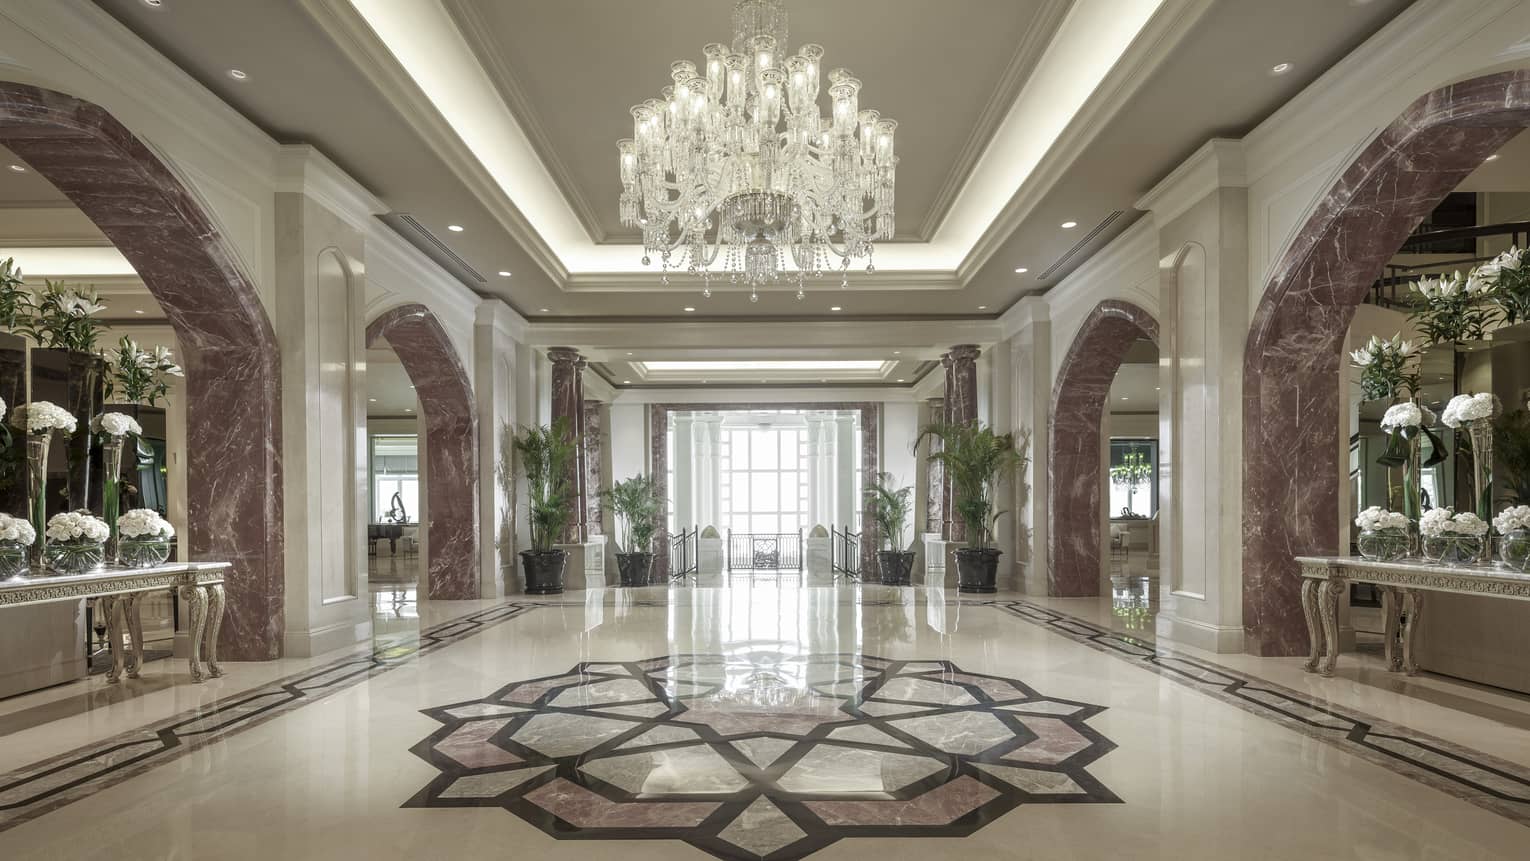 The marble lobby with a crystal chandelier above a mosaic.